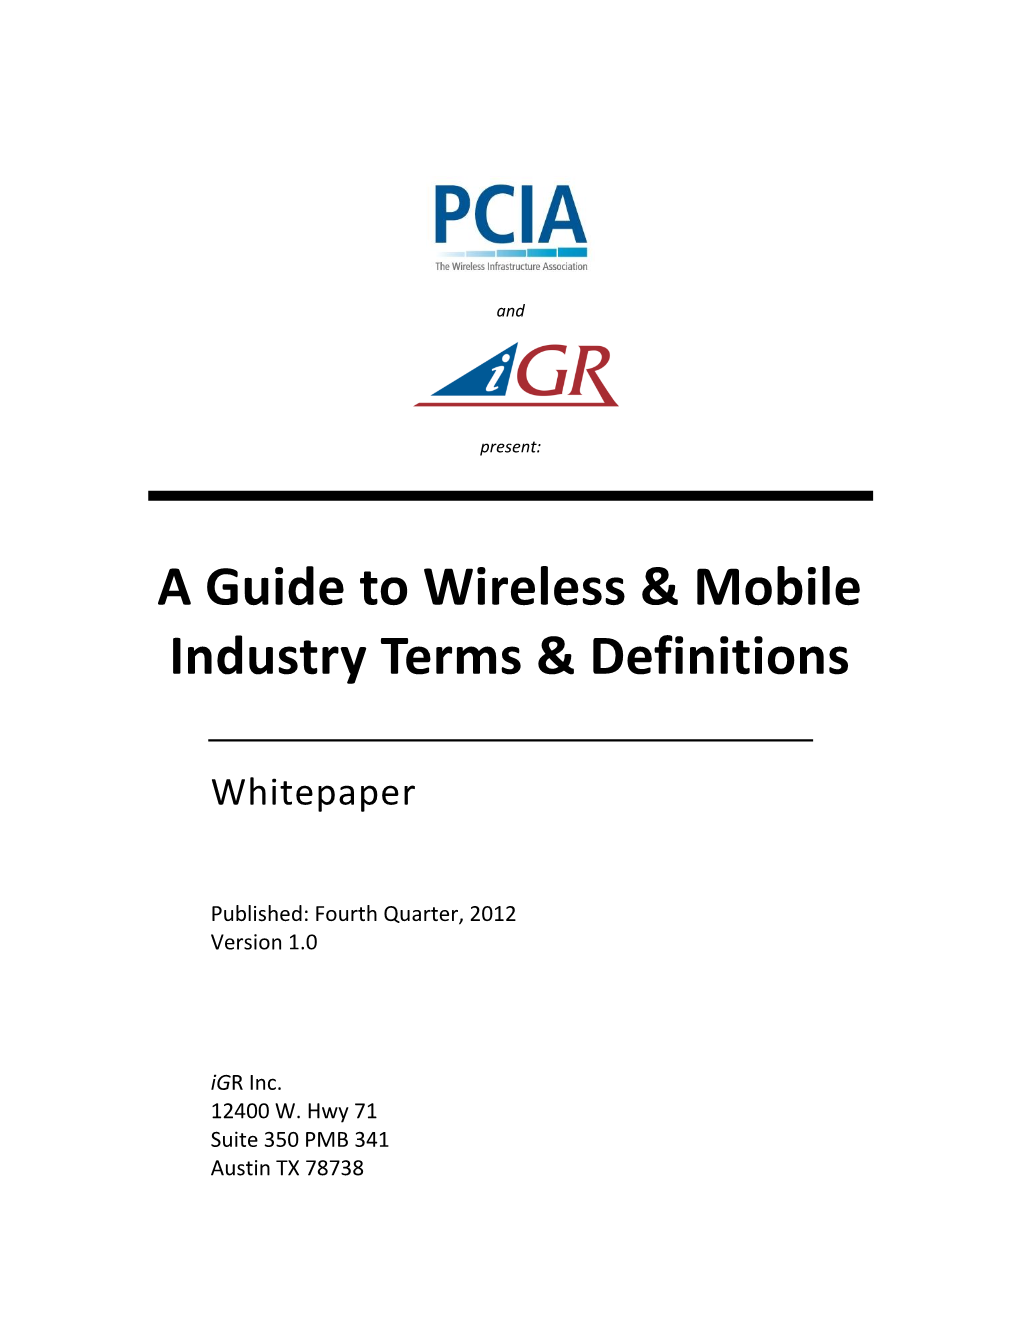 A Guide to Wireless & Mobile Industry Terms & Definitions